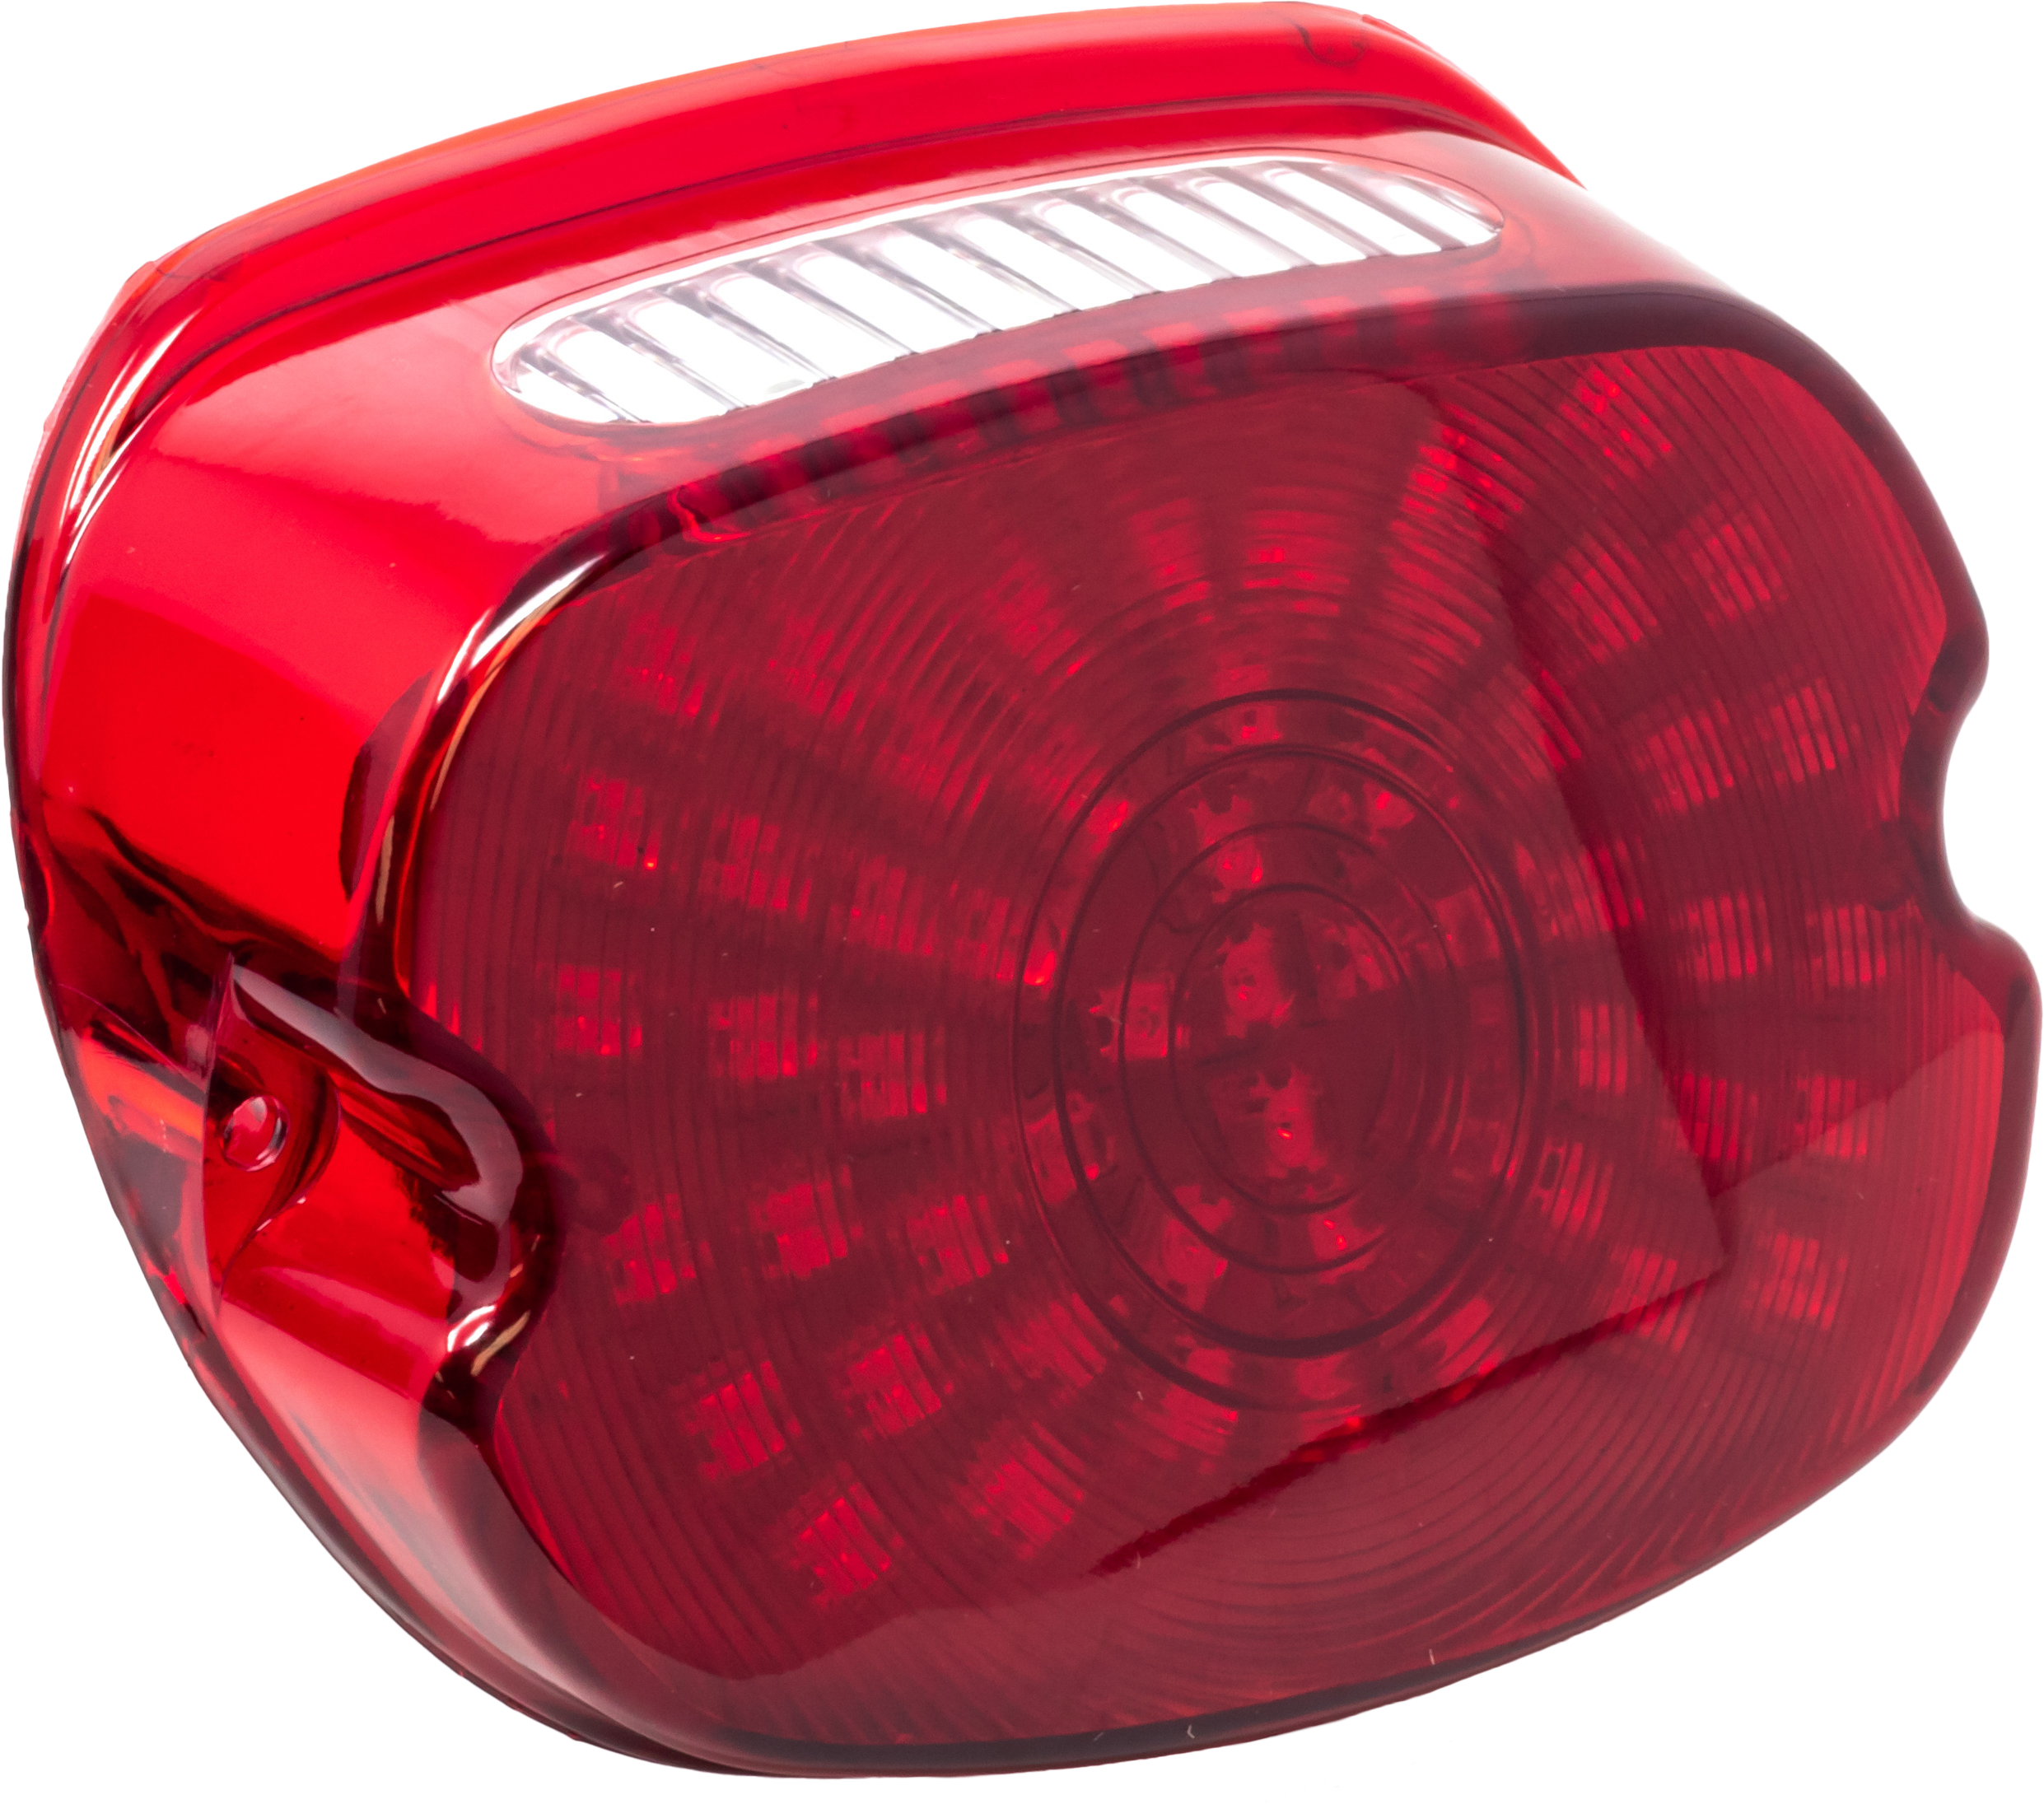 Letric Lighting Co - Slantback So-lo Integrated Led Tailight Red Lens Fxlrst Only